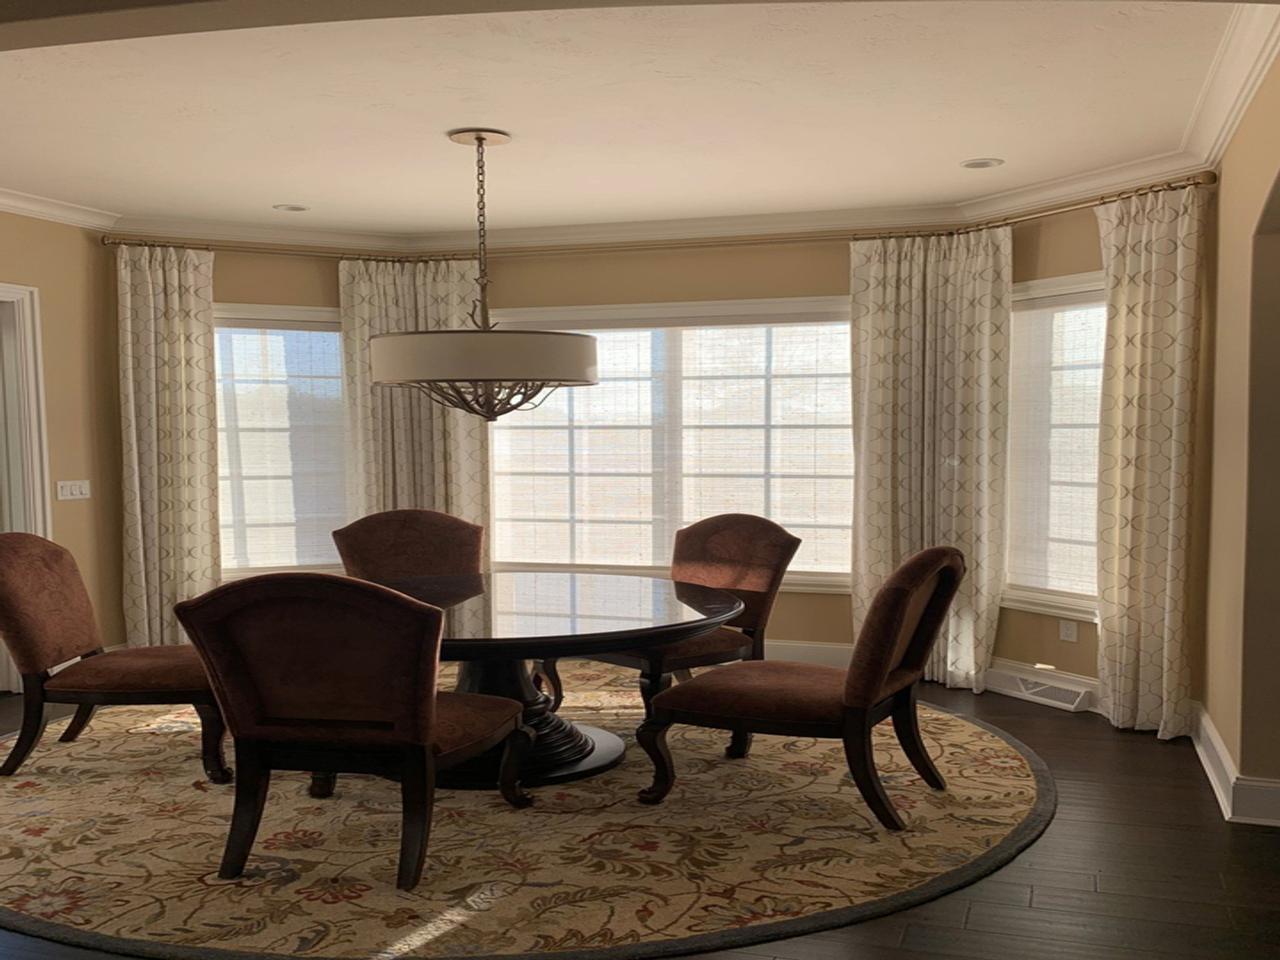 Screen shades and drapes in dining room